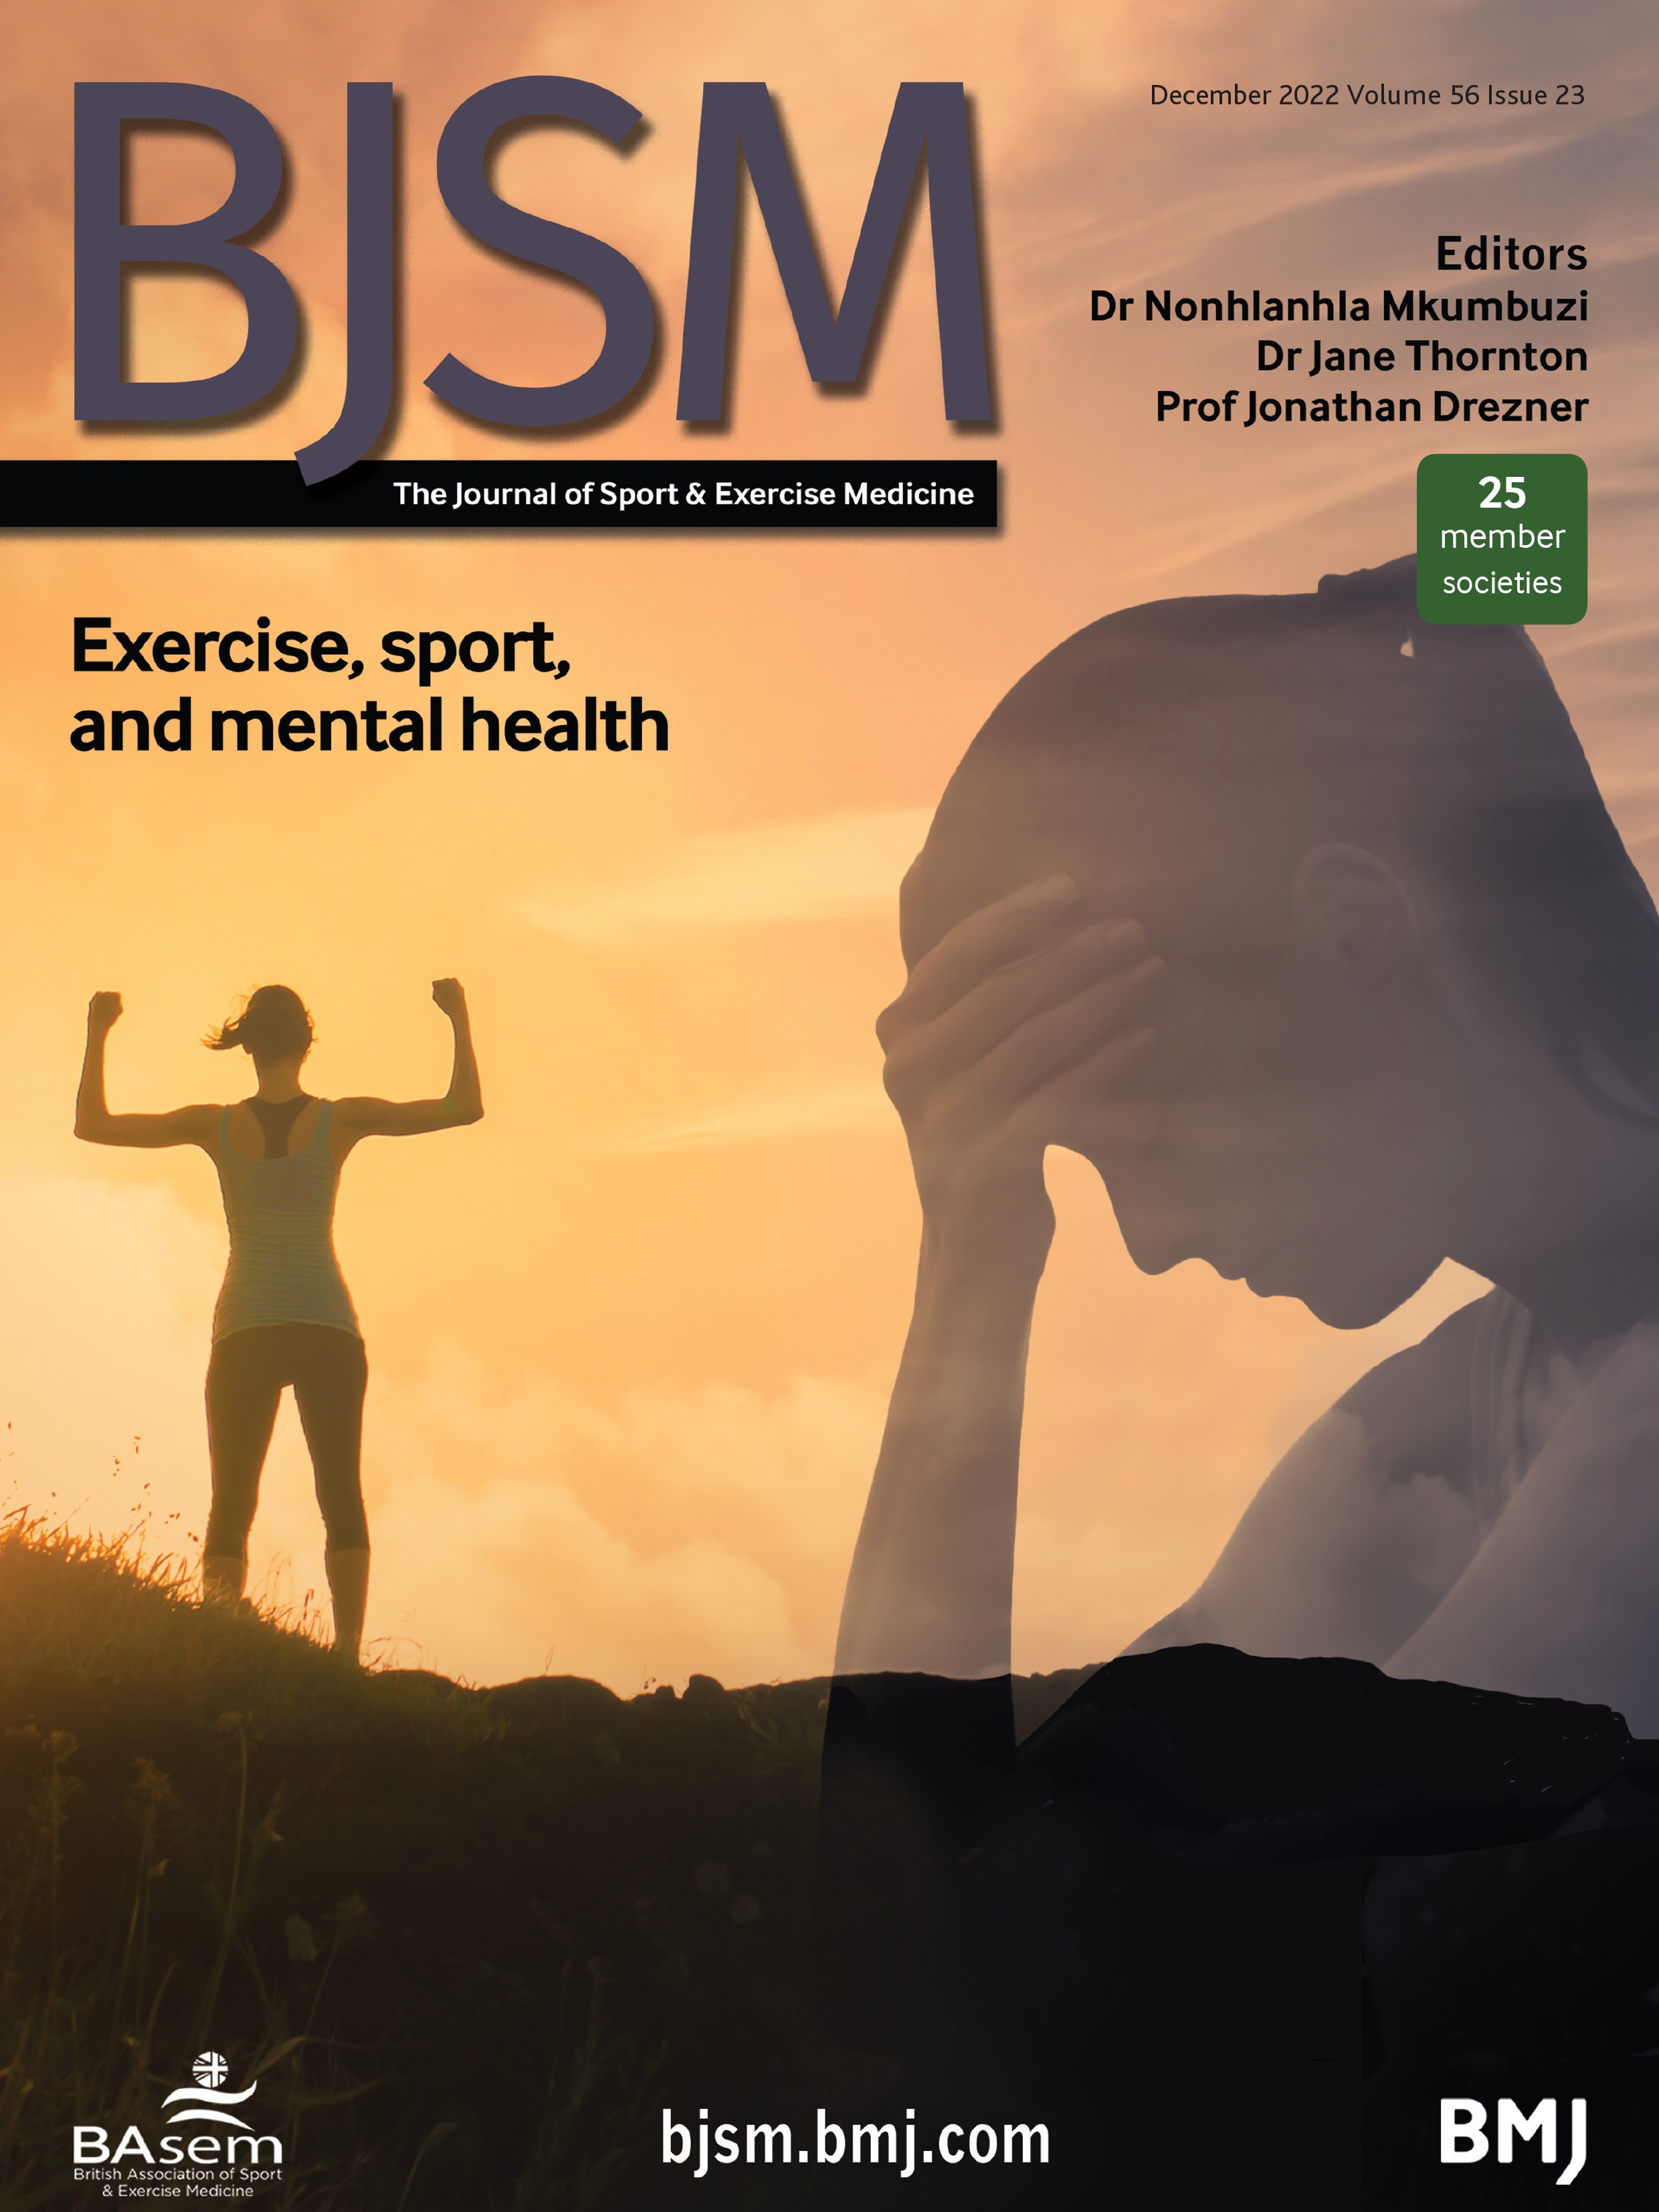 Gender-specific psychosocial stressors influencing mental health among women elite and semielite athletes: a narrative review